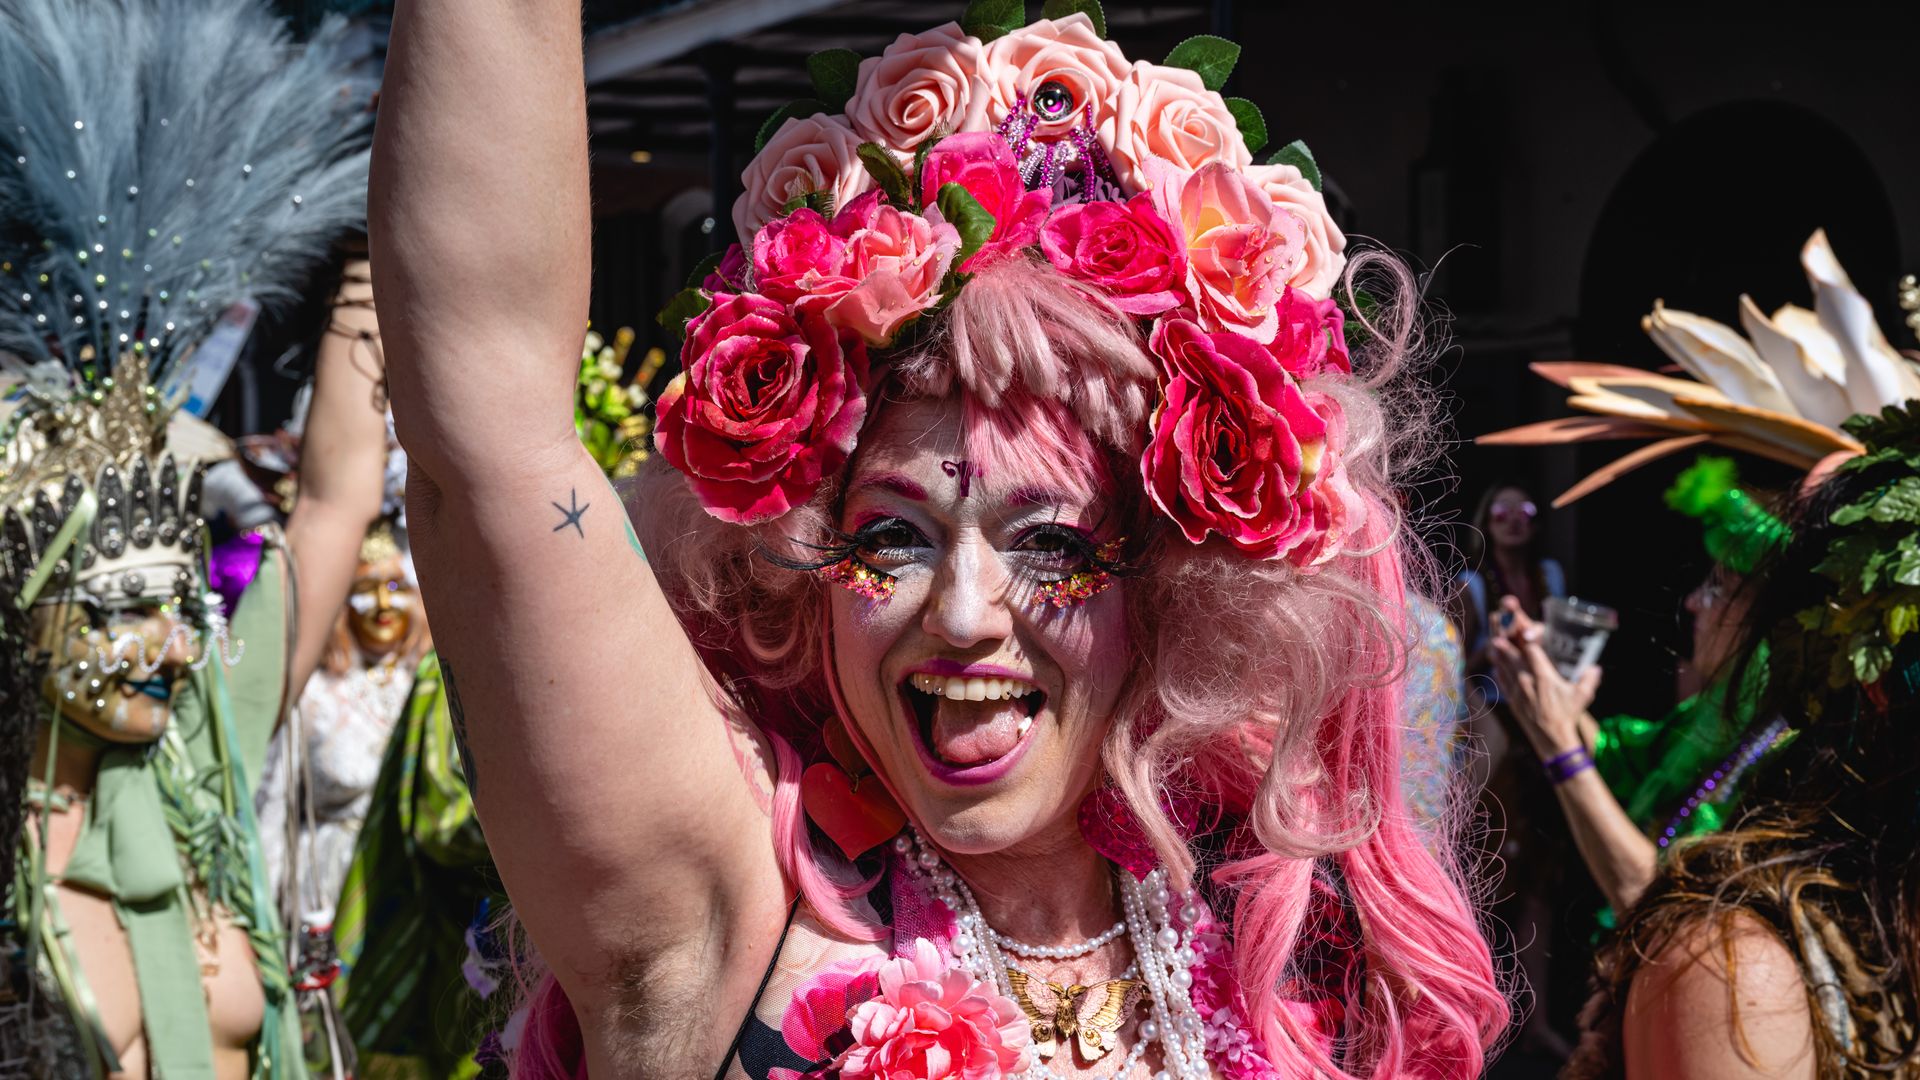 A costumed woman smiles at the camera wearing a bright pink floral headdress and a pink wig.